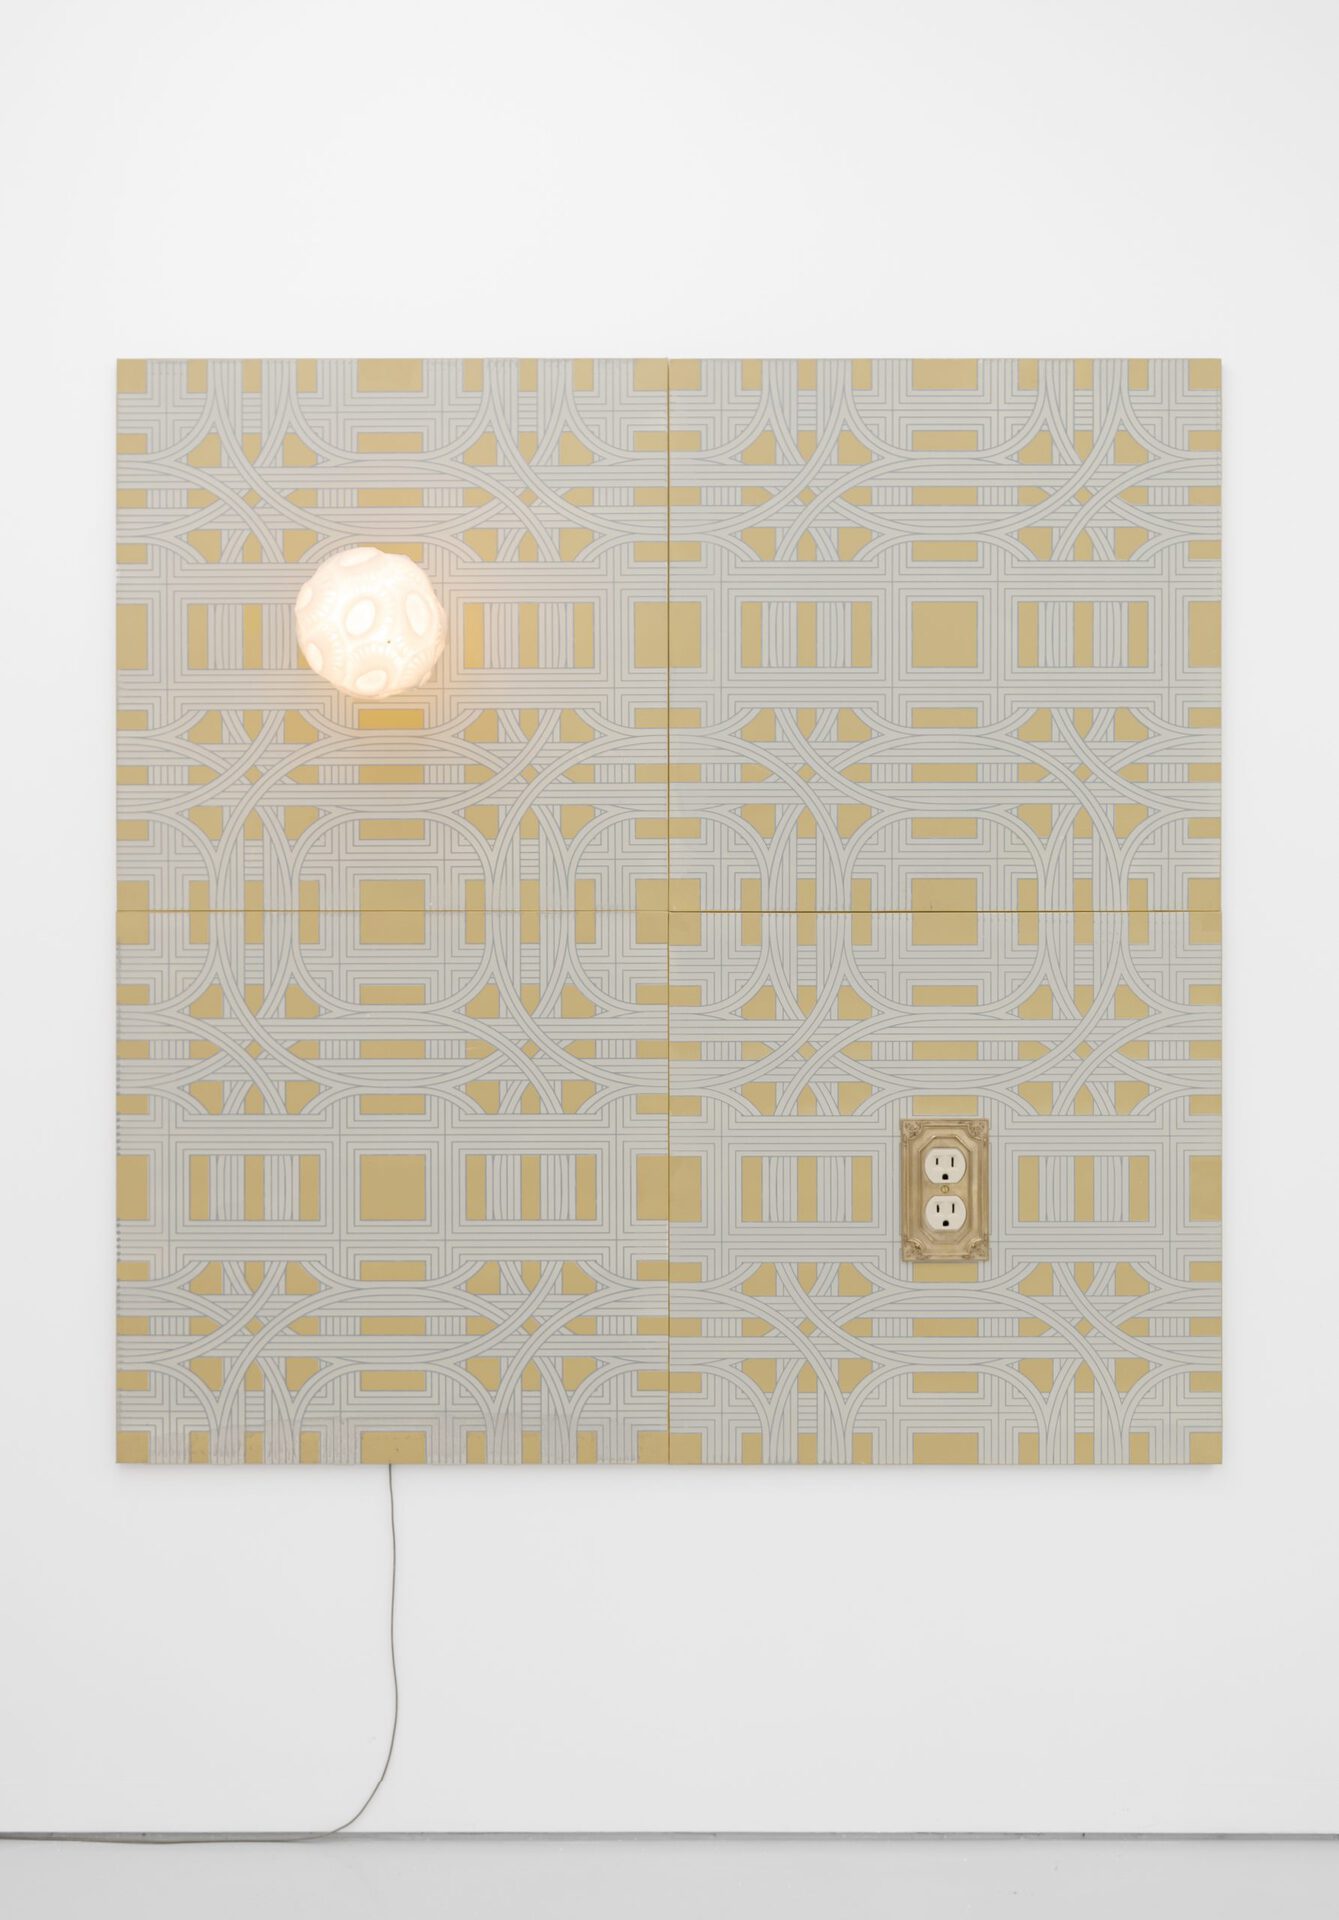 Pentti Monkkonen, Interchange Wallpaper with outlet and Cocolith lamp (left), 2021 Acrylic on canvas mounted on wood, brass, urethane, epoxy resin, lamp 182 x 182 x 2 cm (71 5/8 x 71 5/8 x 3/4 in). Courtesy of the artist and High Art